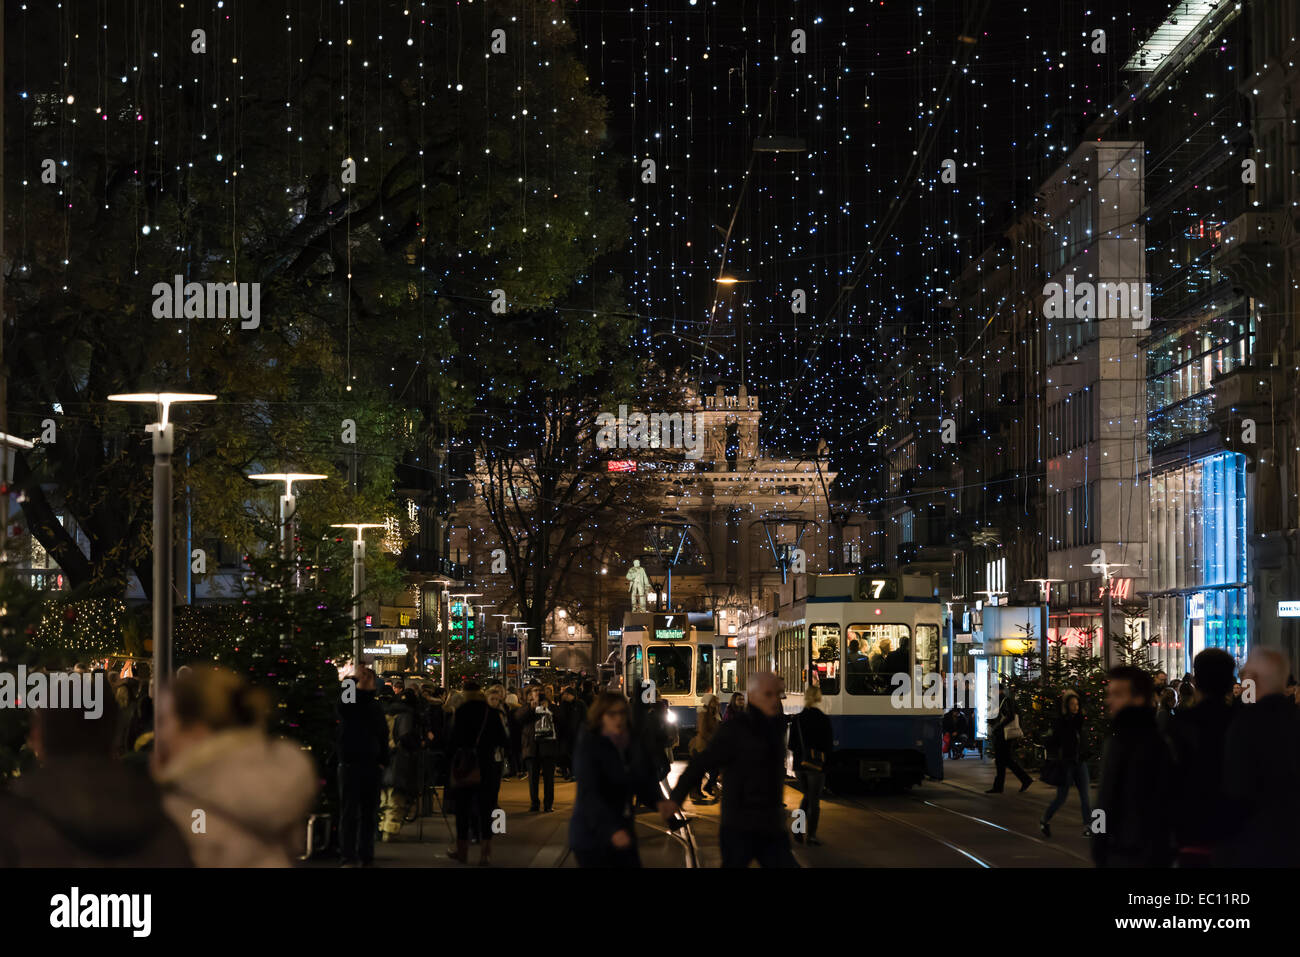 Christmas shoppers and tramway trains on Zurich's crowded Bahnhofstrasse under the glowing Christmas illumination Stock Photo